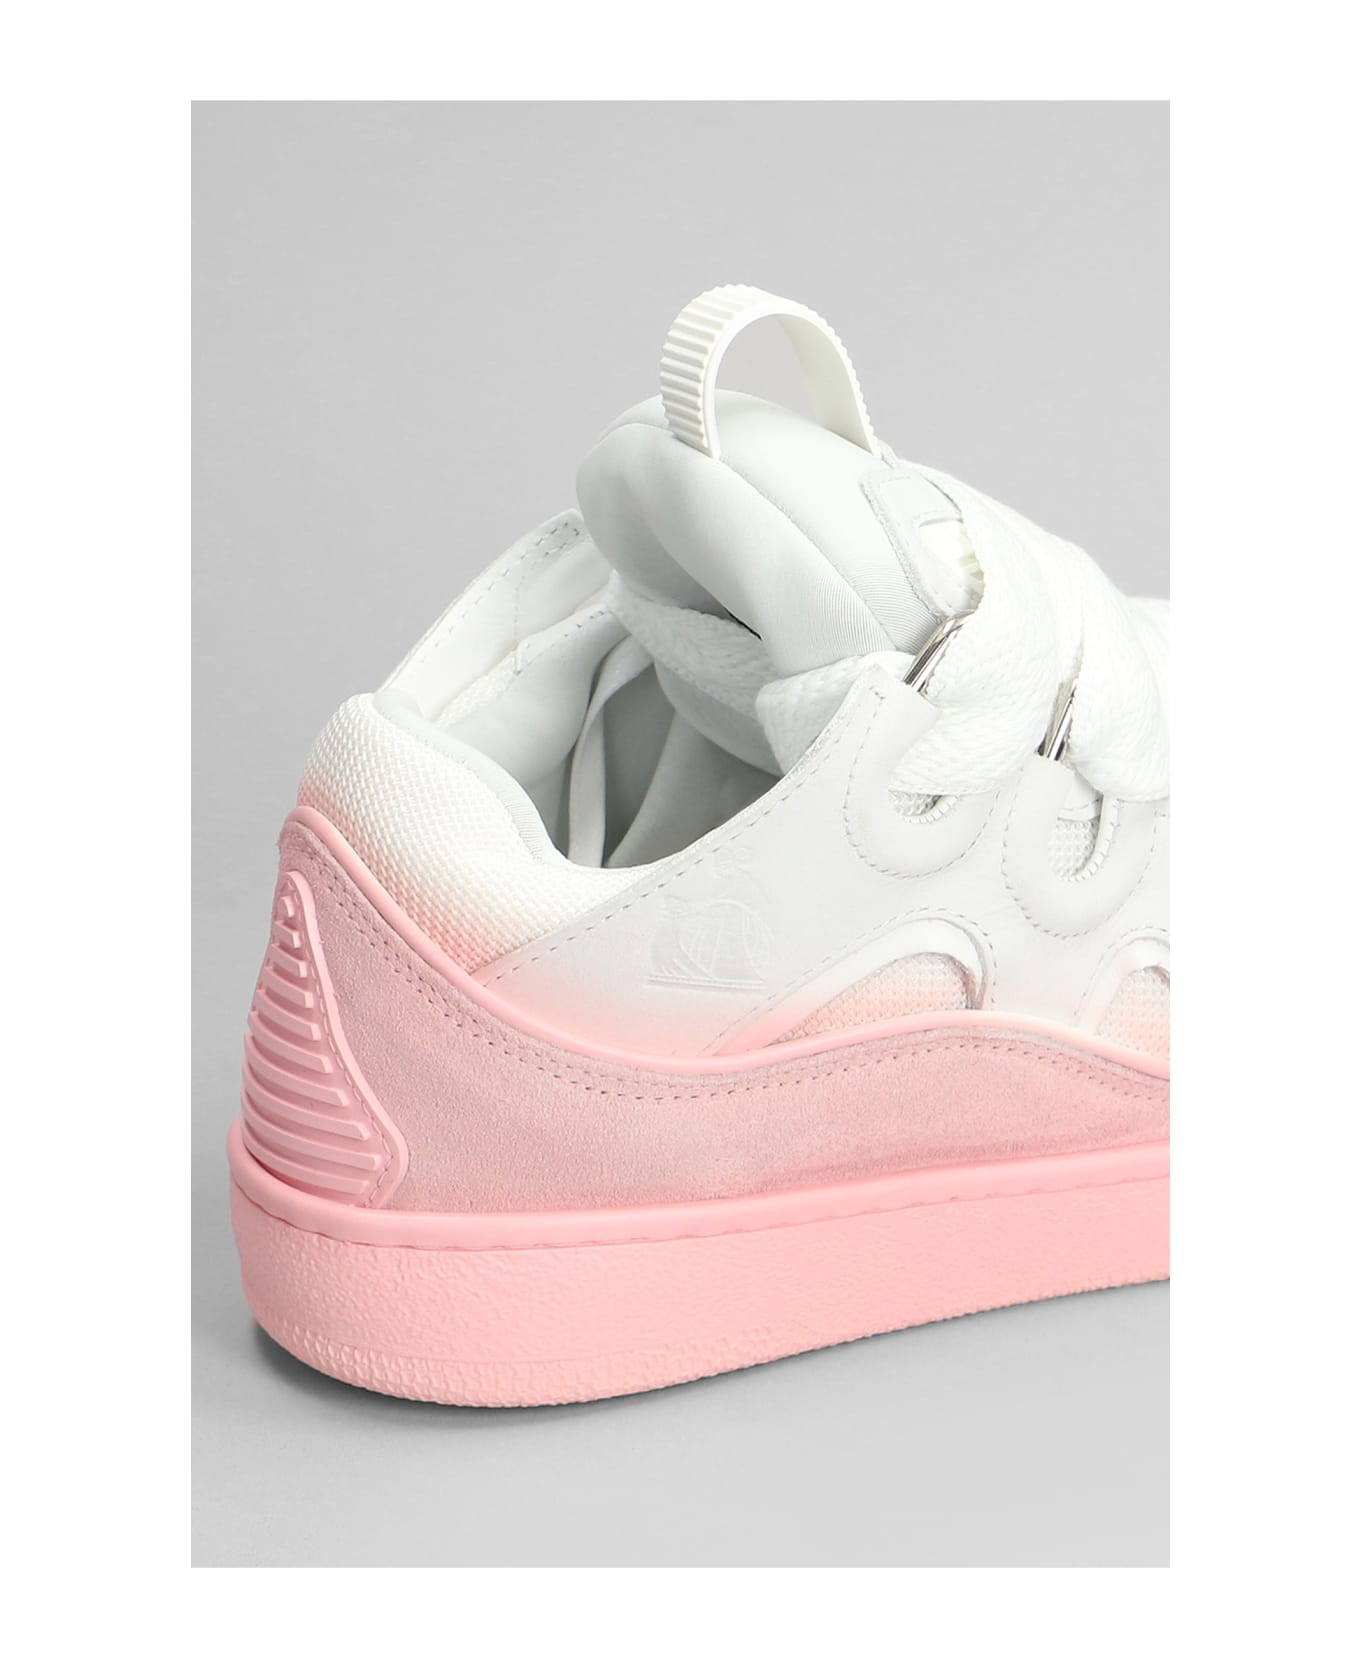 Lanvin Curb Sneakers In Rose-pink Leather - rose-pink スニーカー